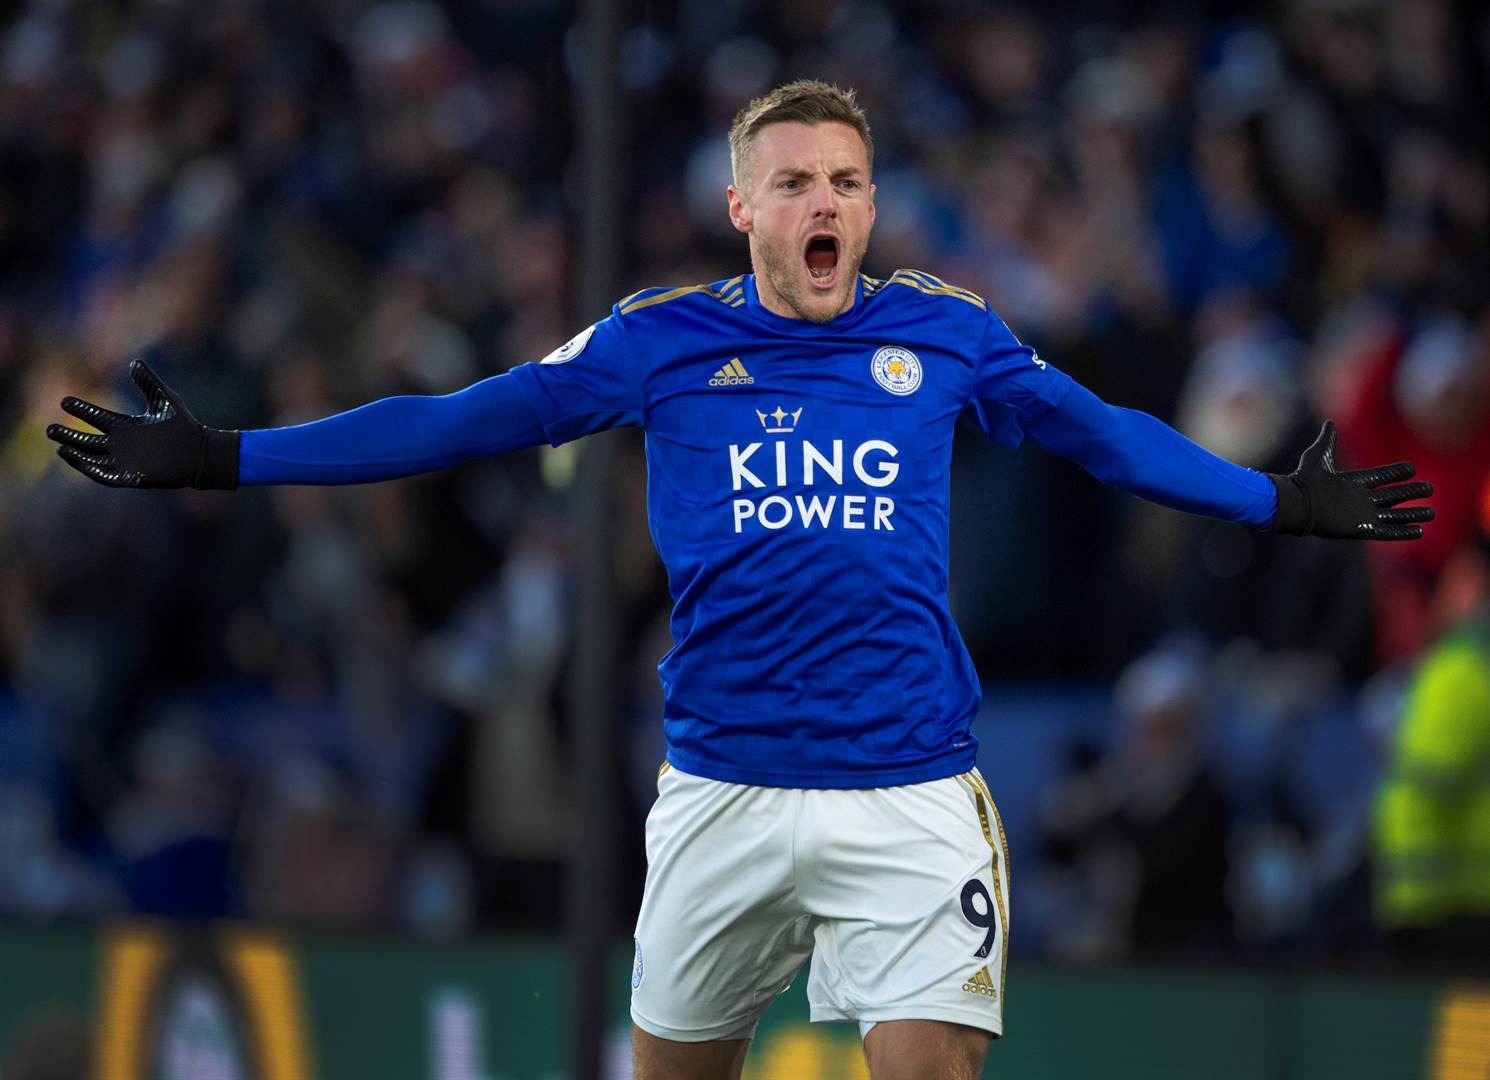 6. Jamie Vardy (Leicester City) - 17 goals (34pts)